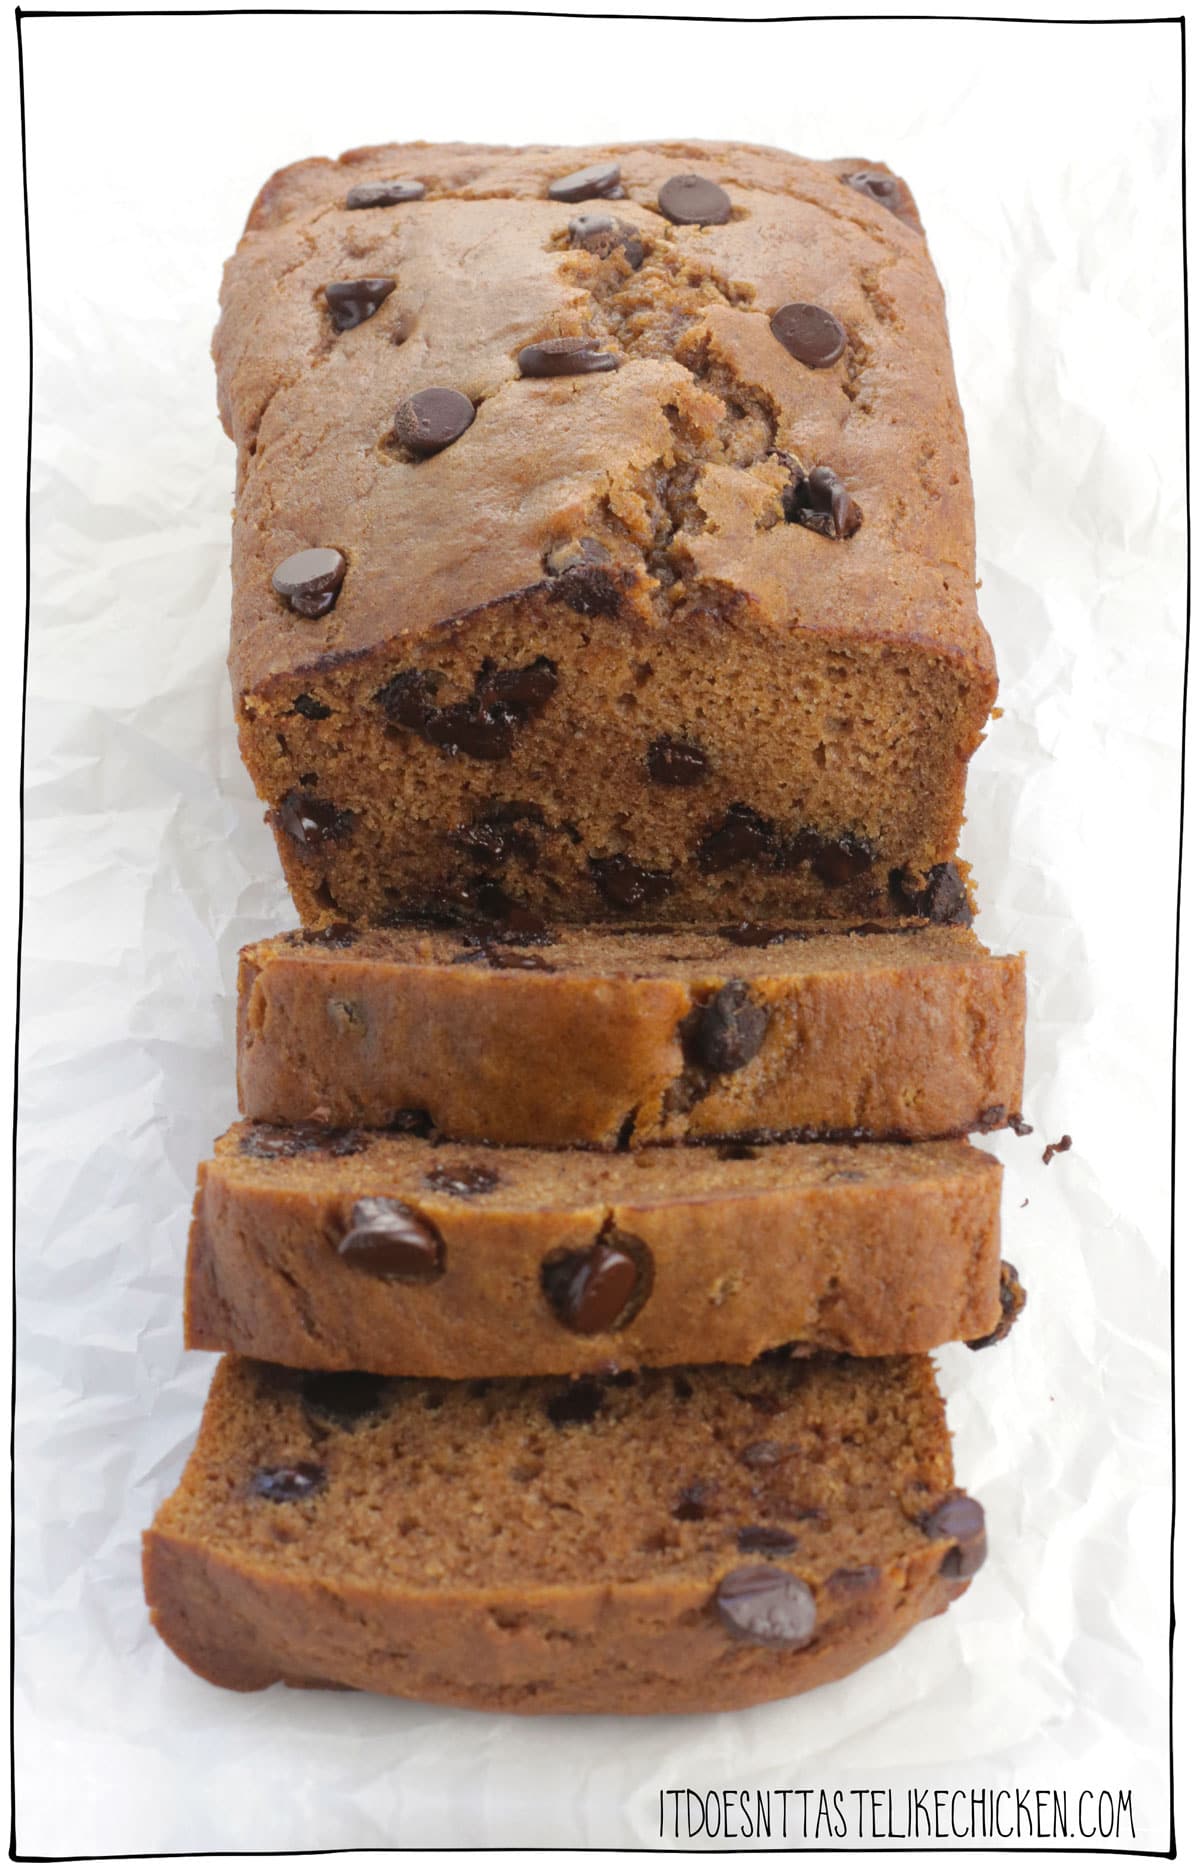 This Vegan Chocolate Chip Pumpkin Bread is so tender, it's deliciously moist, chocolatey, pumpkin infused, and surprisingly easy to make too! Just whip up the simple batter, pour in a pan, and bake. That's it. And if you don't like chocolate (weirdo), you can either omit the chocolate chips, or replace them with crunchy walnuts, pecans, or pepitas. #itdoesnttastelikechicken #veganbaking #pumpkin